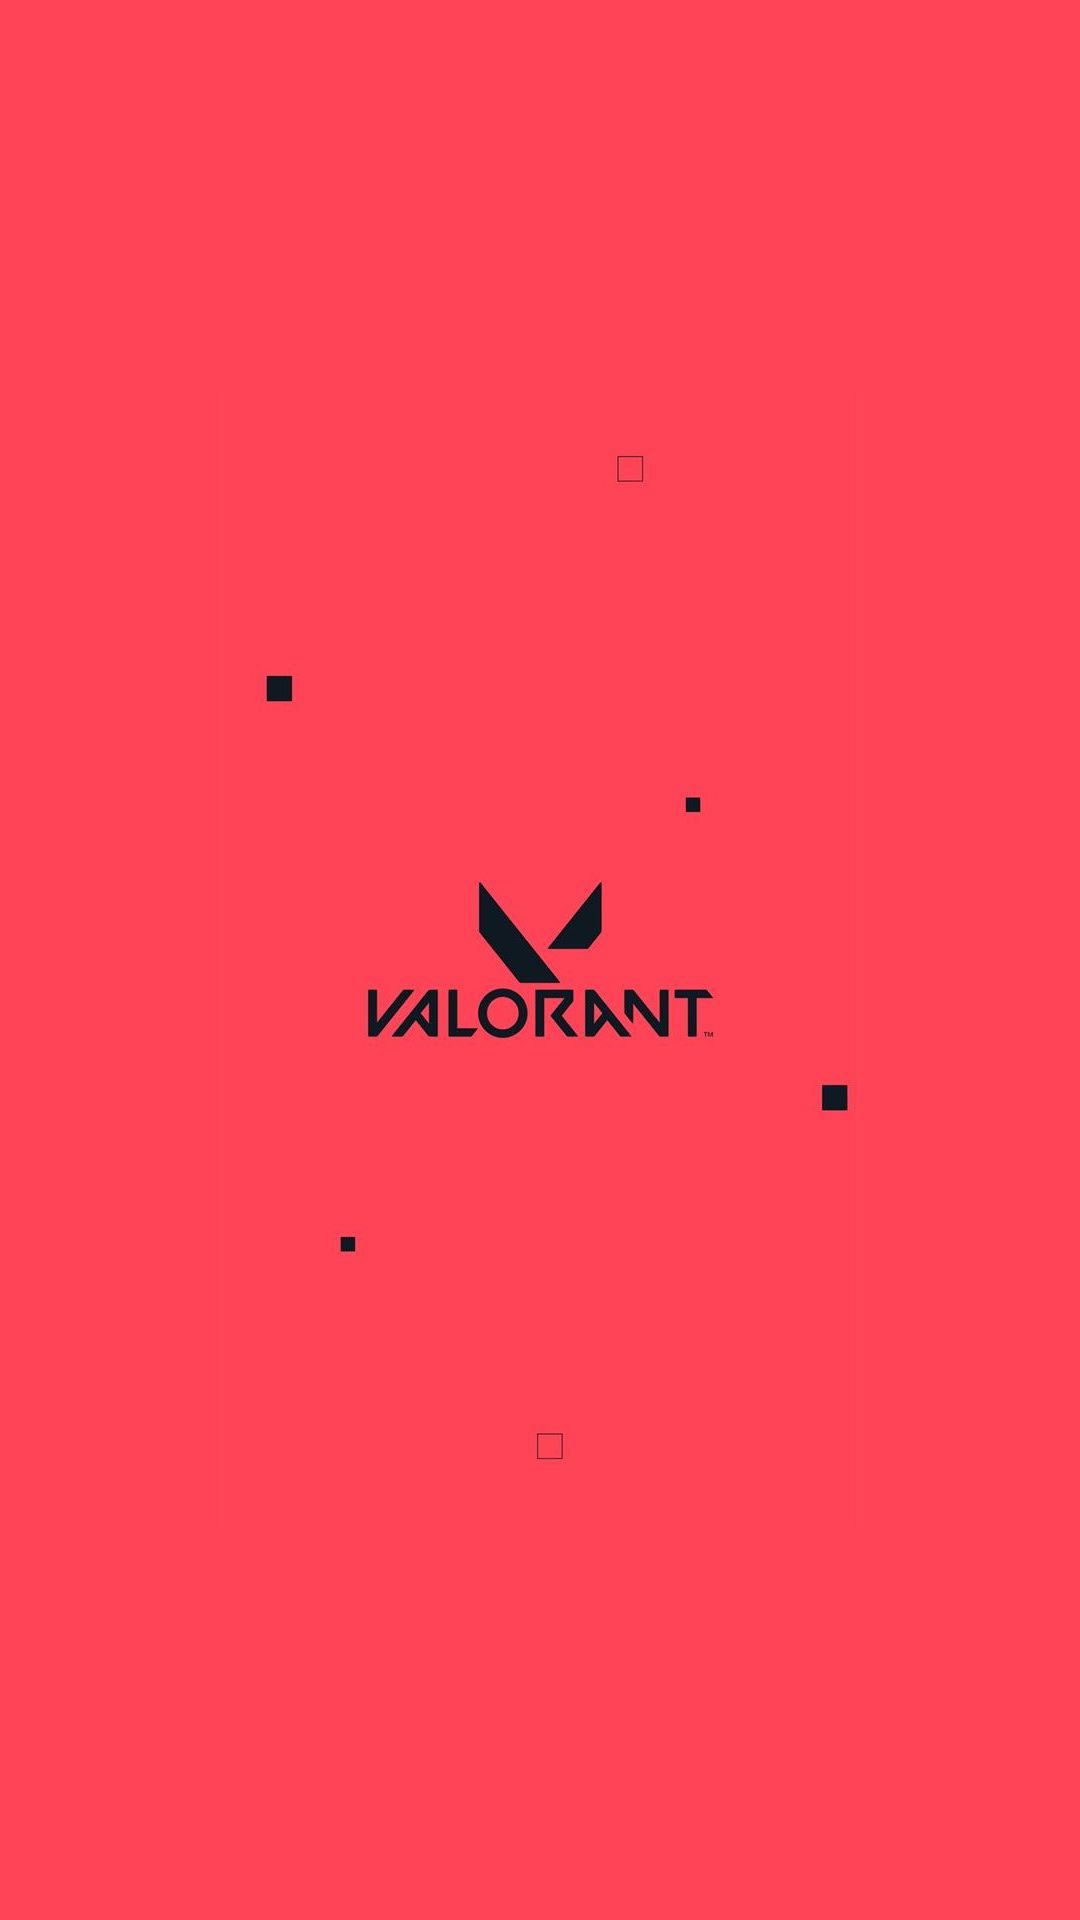 Valorant phone wallpaper red. Phone wallpaper, Wallpaper, Synthwave